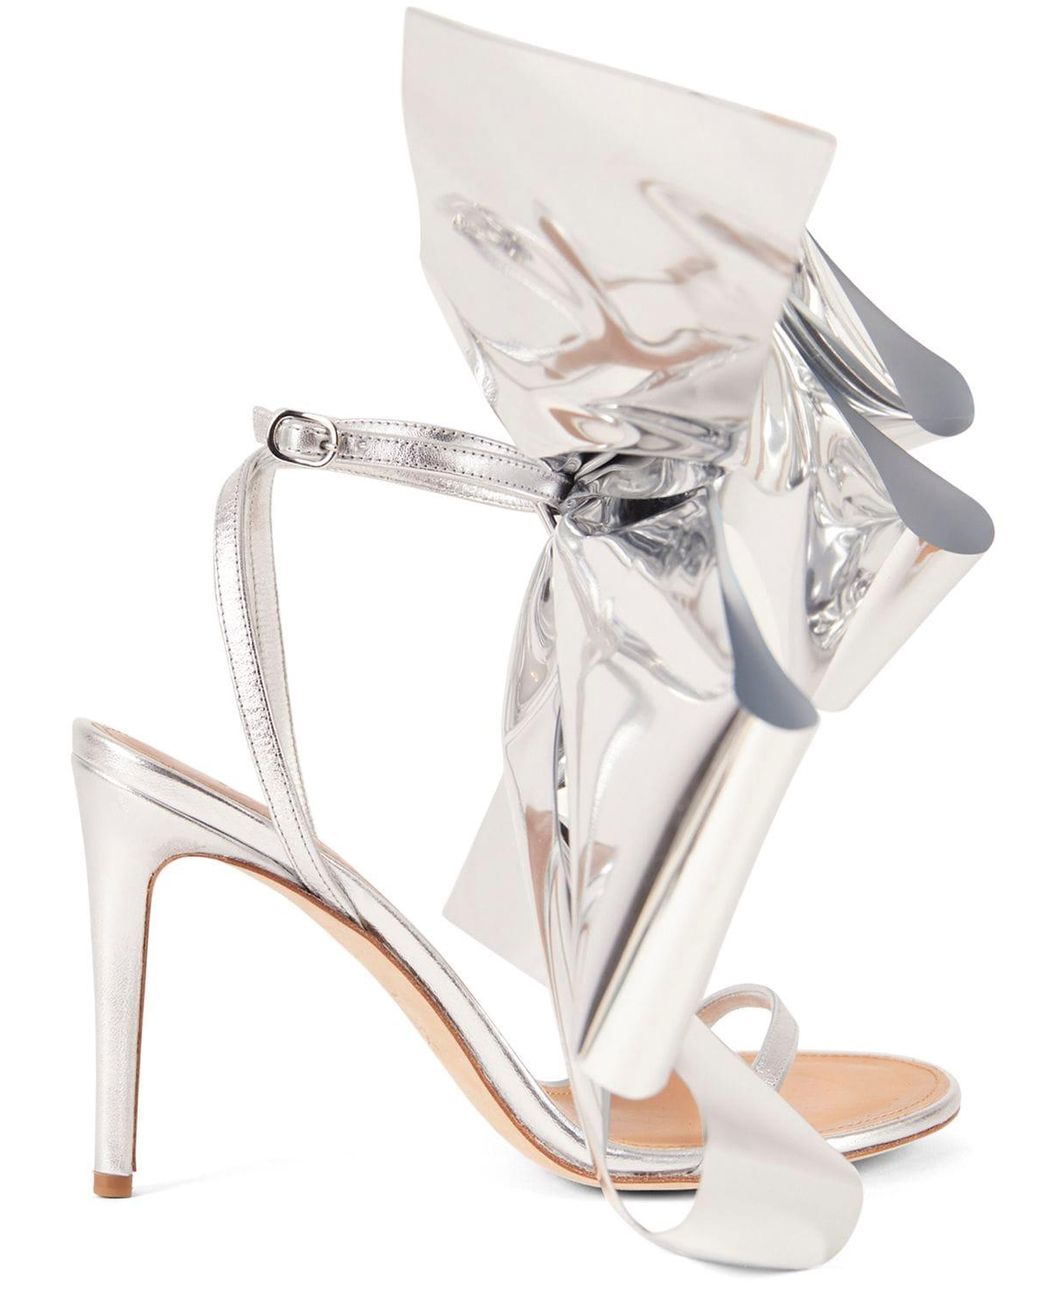 Loewe 100mm Bow Metallic Leather Sandals in Silver (White) | Lyst